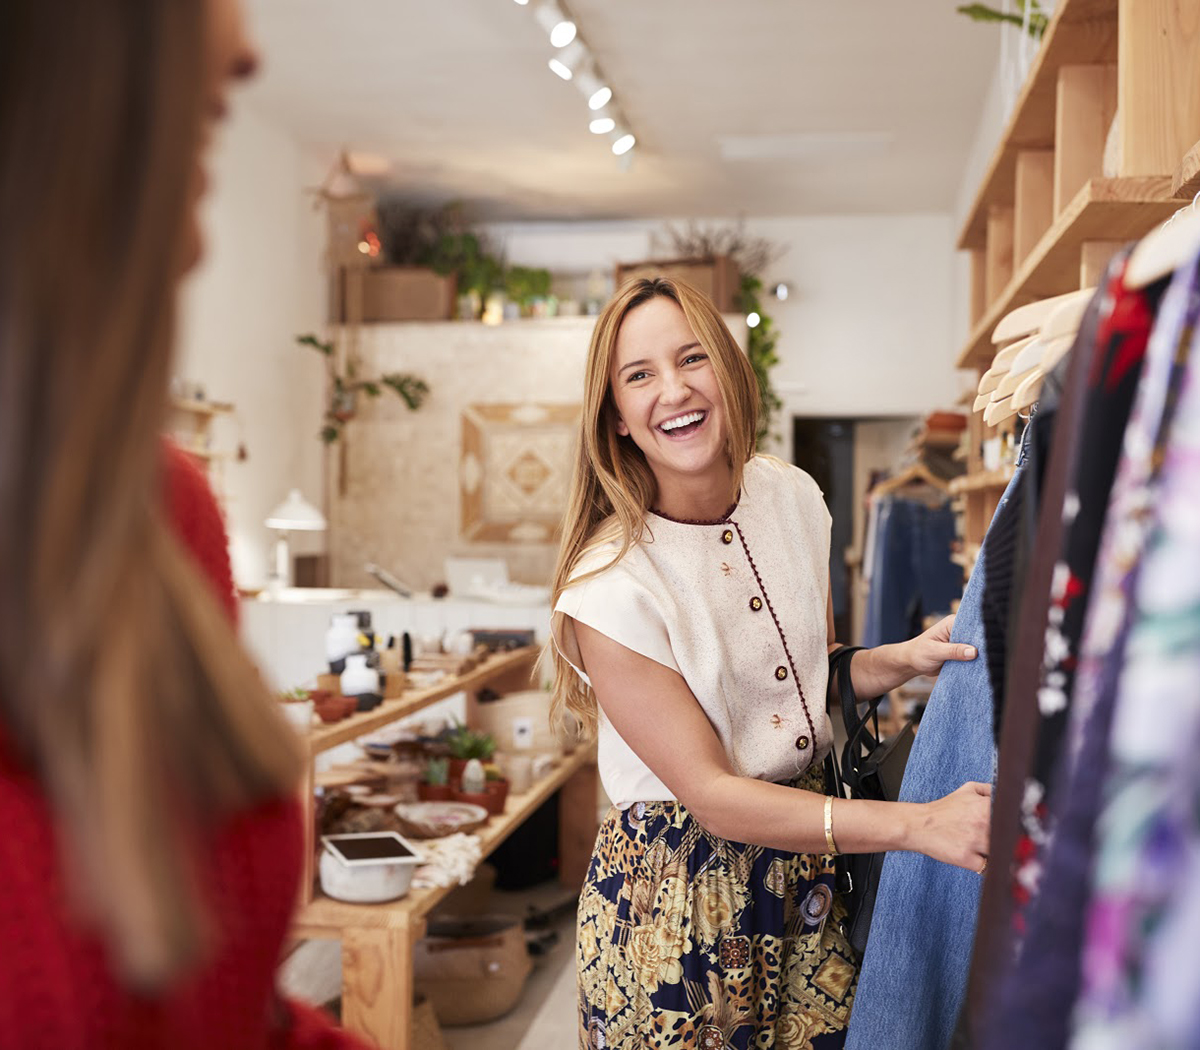 4 ways to build brand loyalty and maintain happy customers.